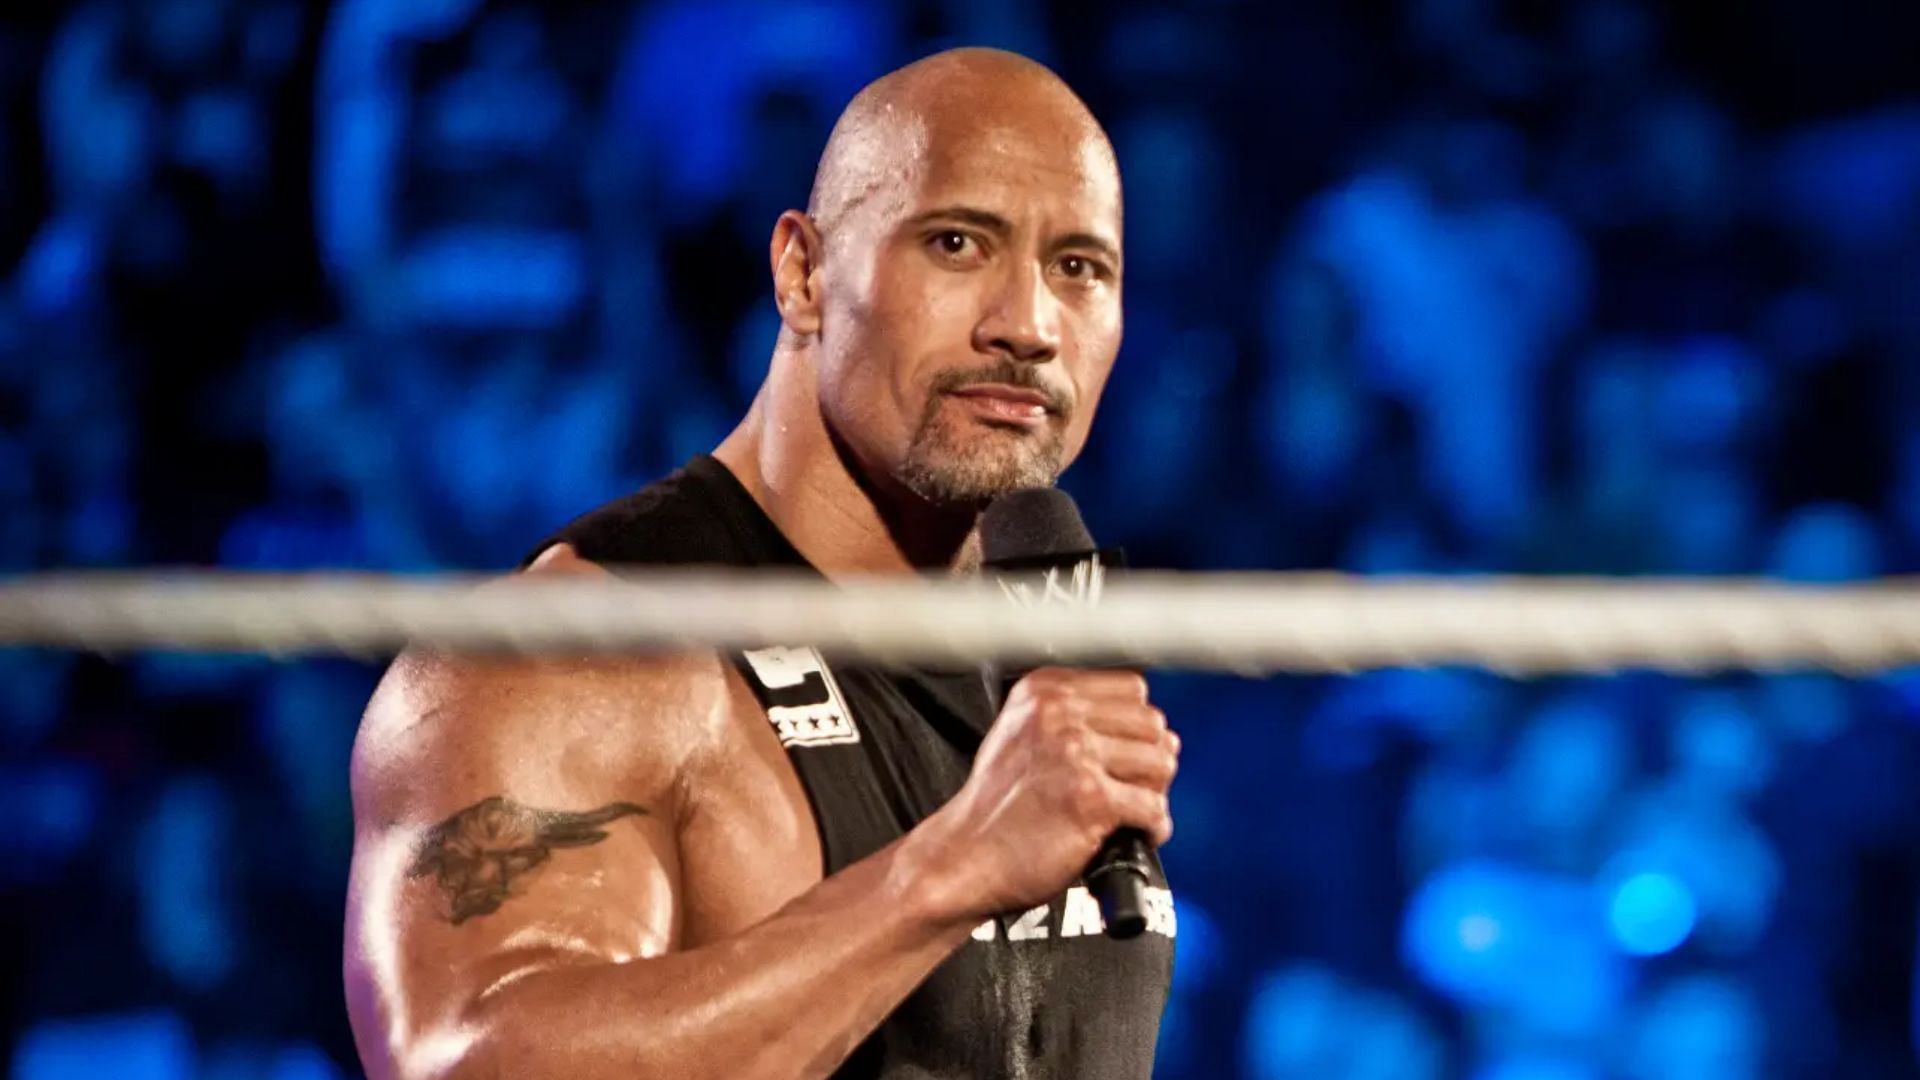 The Rock has condemned the ongoing Middle Eastern conflict.